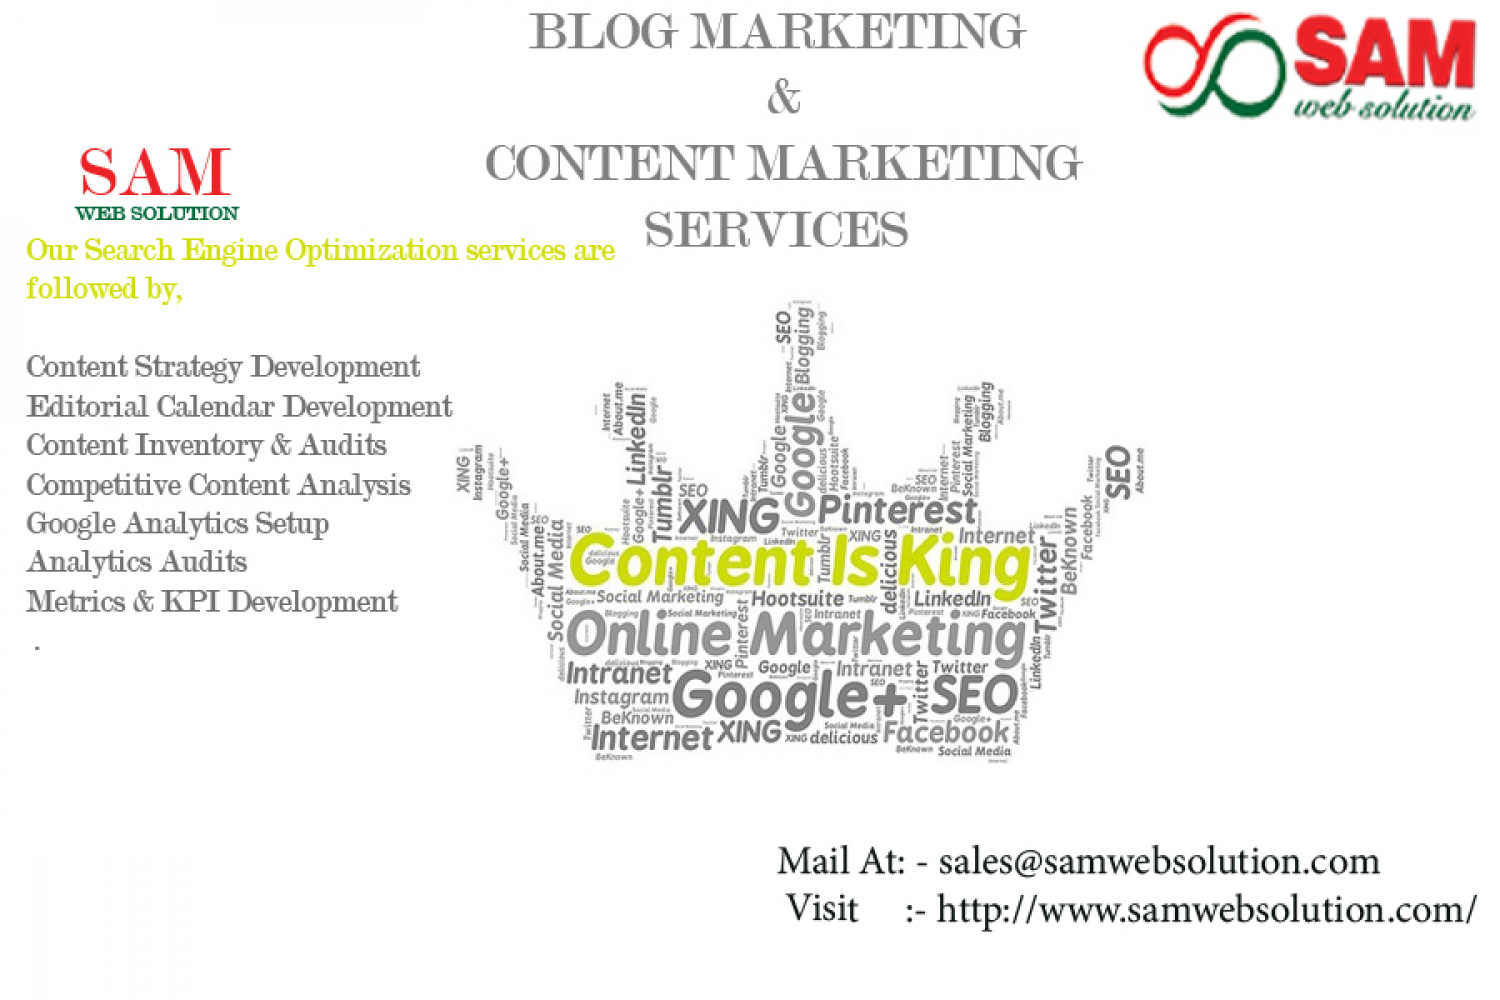 Blog Marketing And Content Marketing Infographic